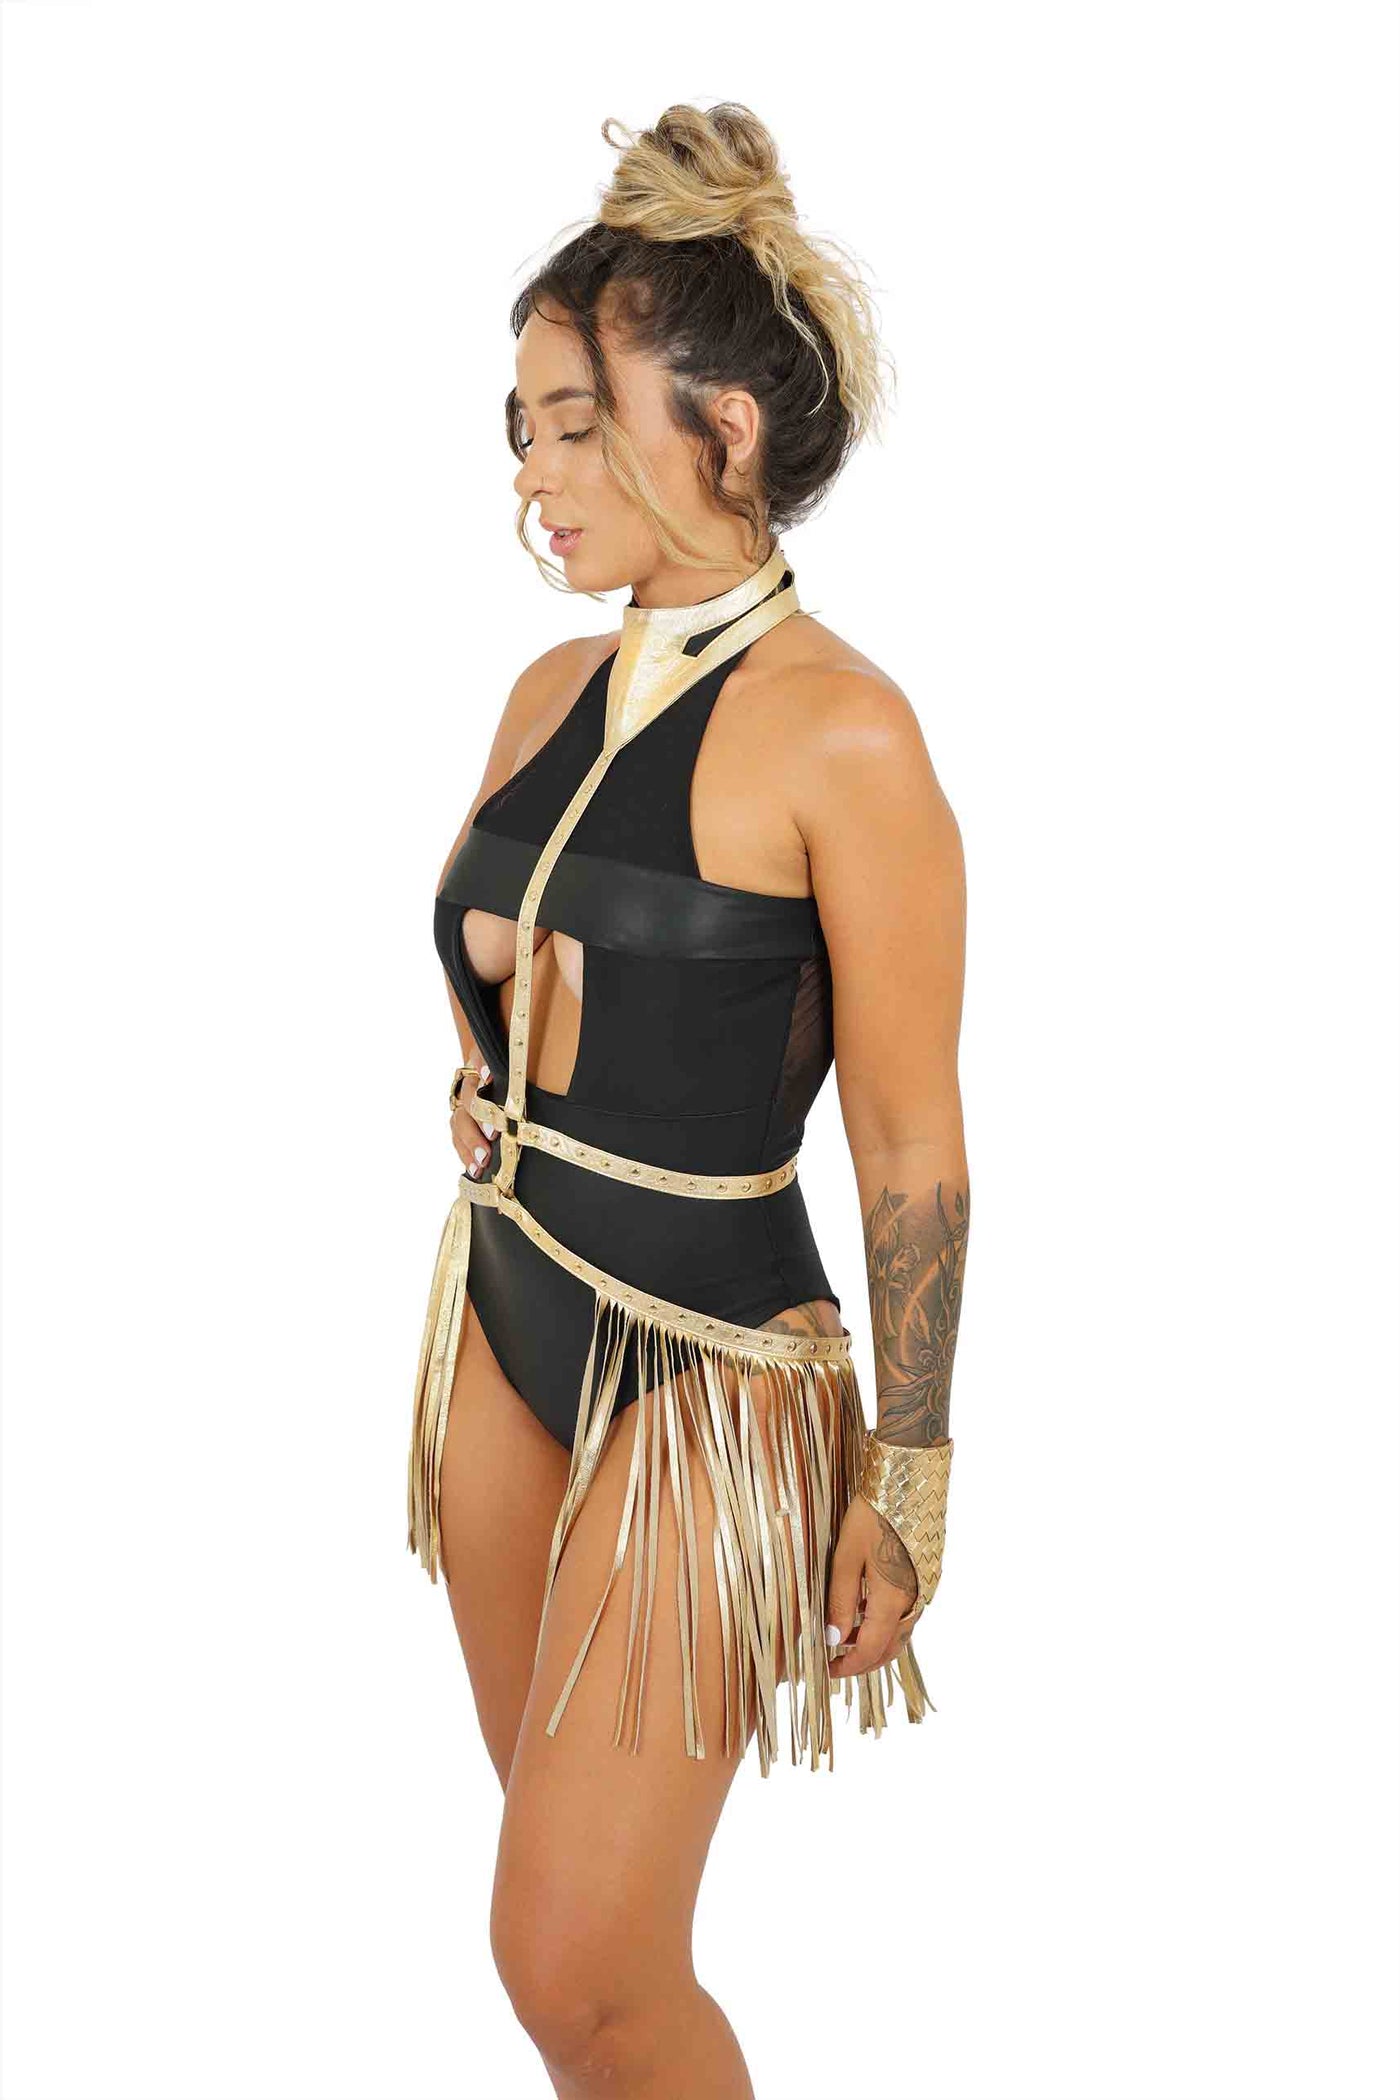 Woman wearing a gold Leather Body Harness with tassel belt skirt from Love Khaos.